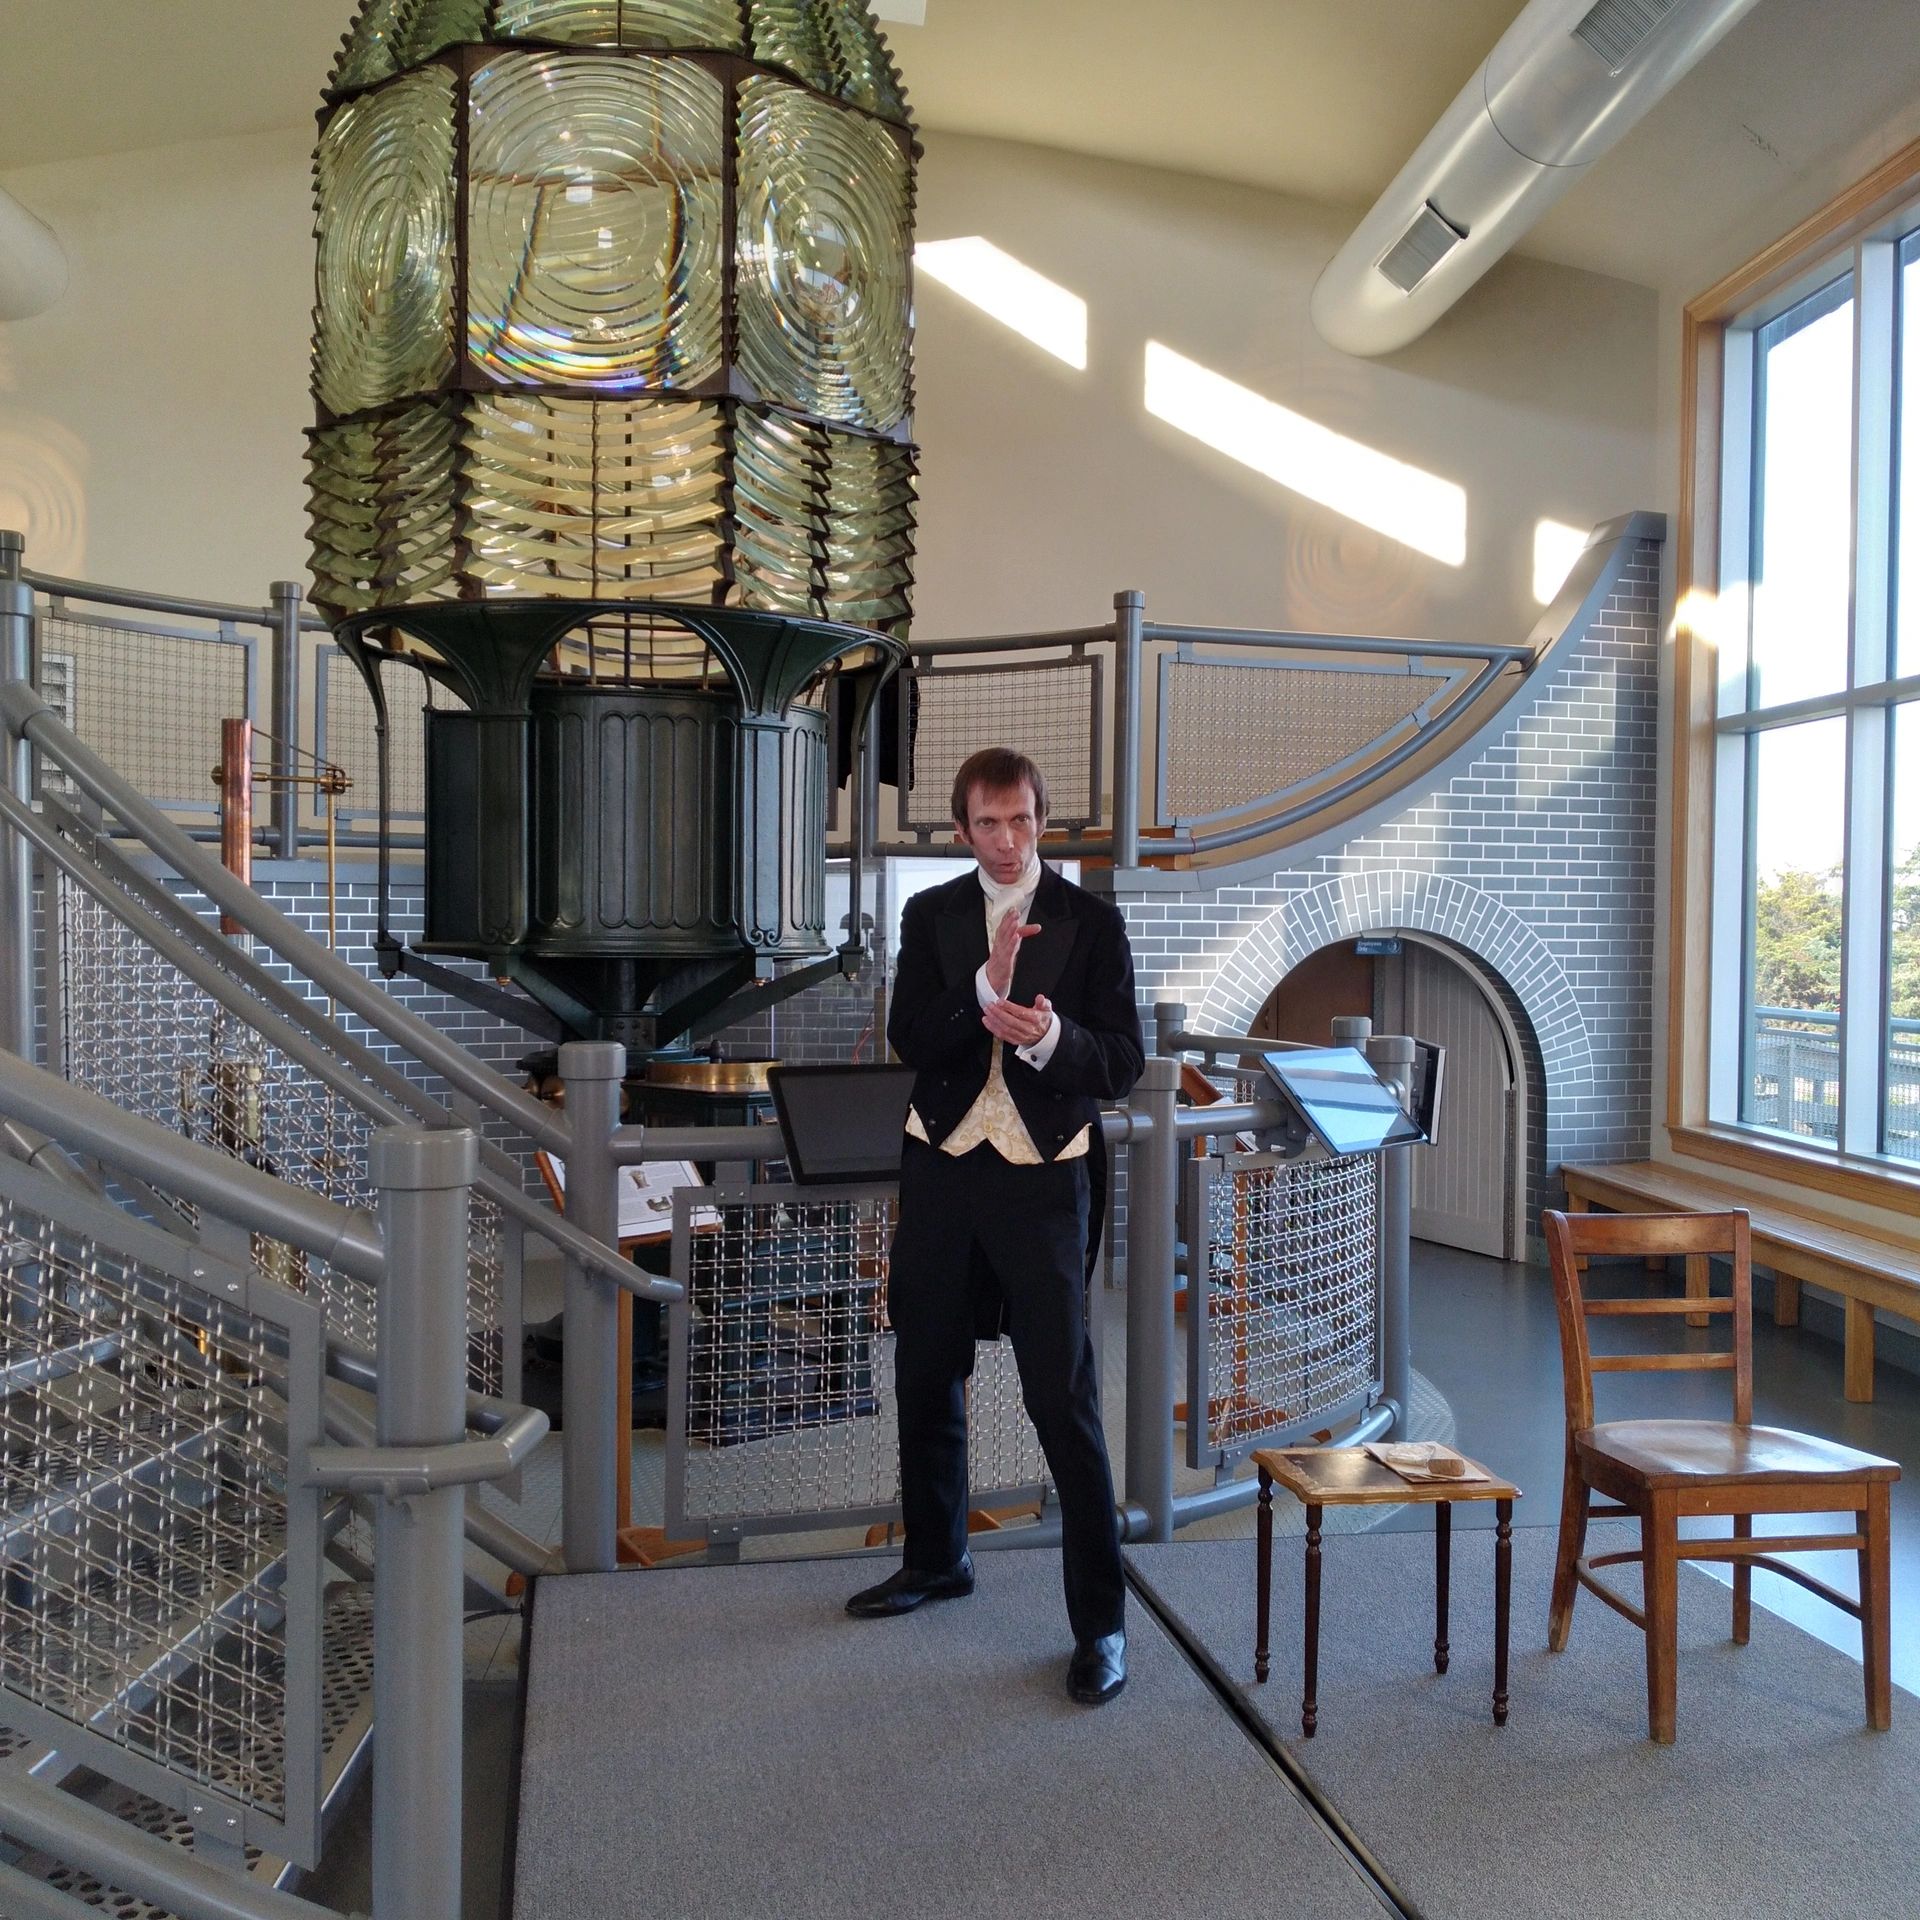 Joseph Smith as Augustin Fresnel in the Lens Building at  Fire Island Lighthouse.